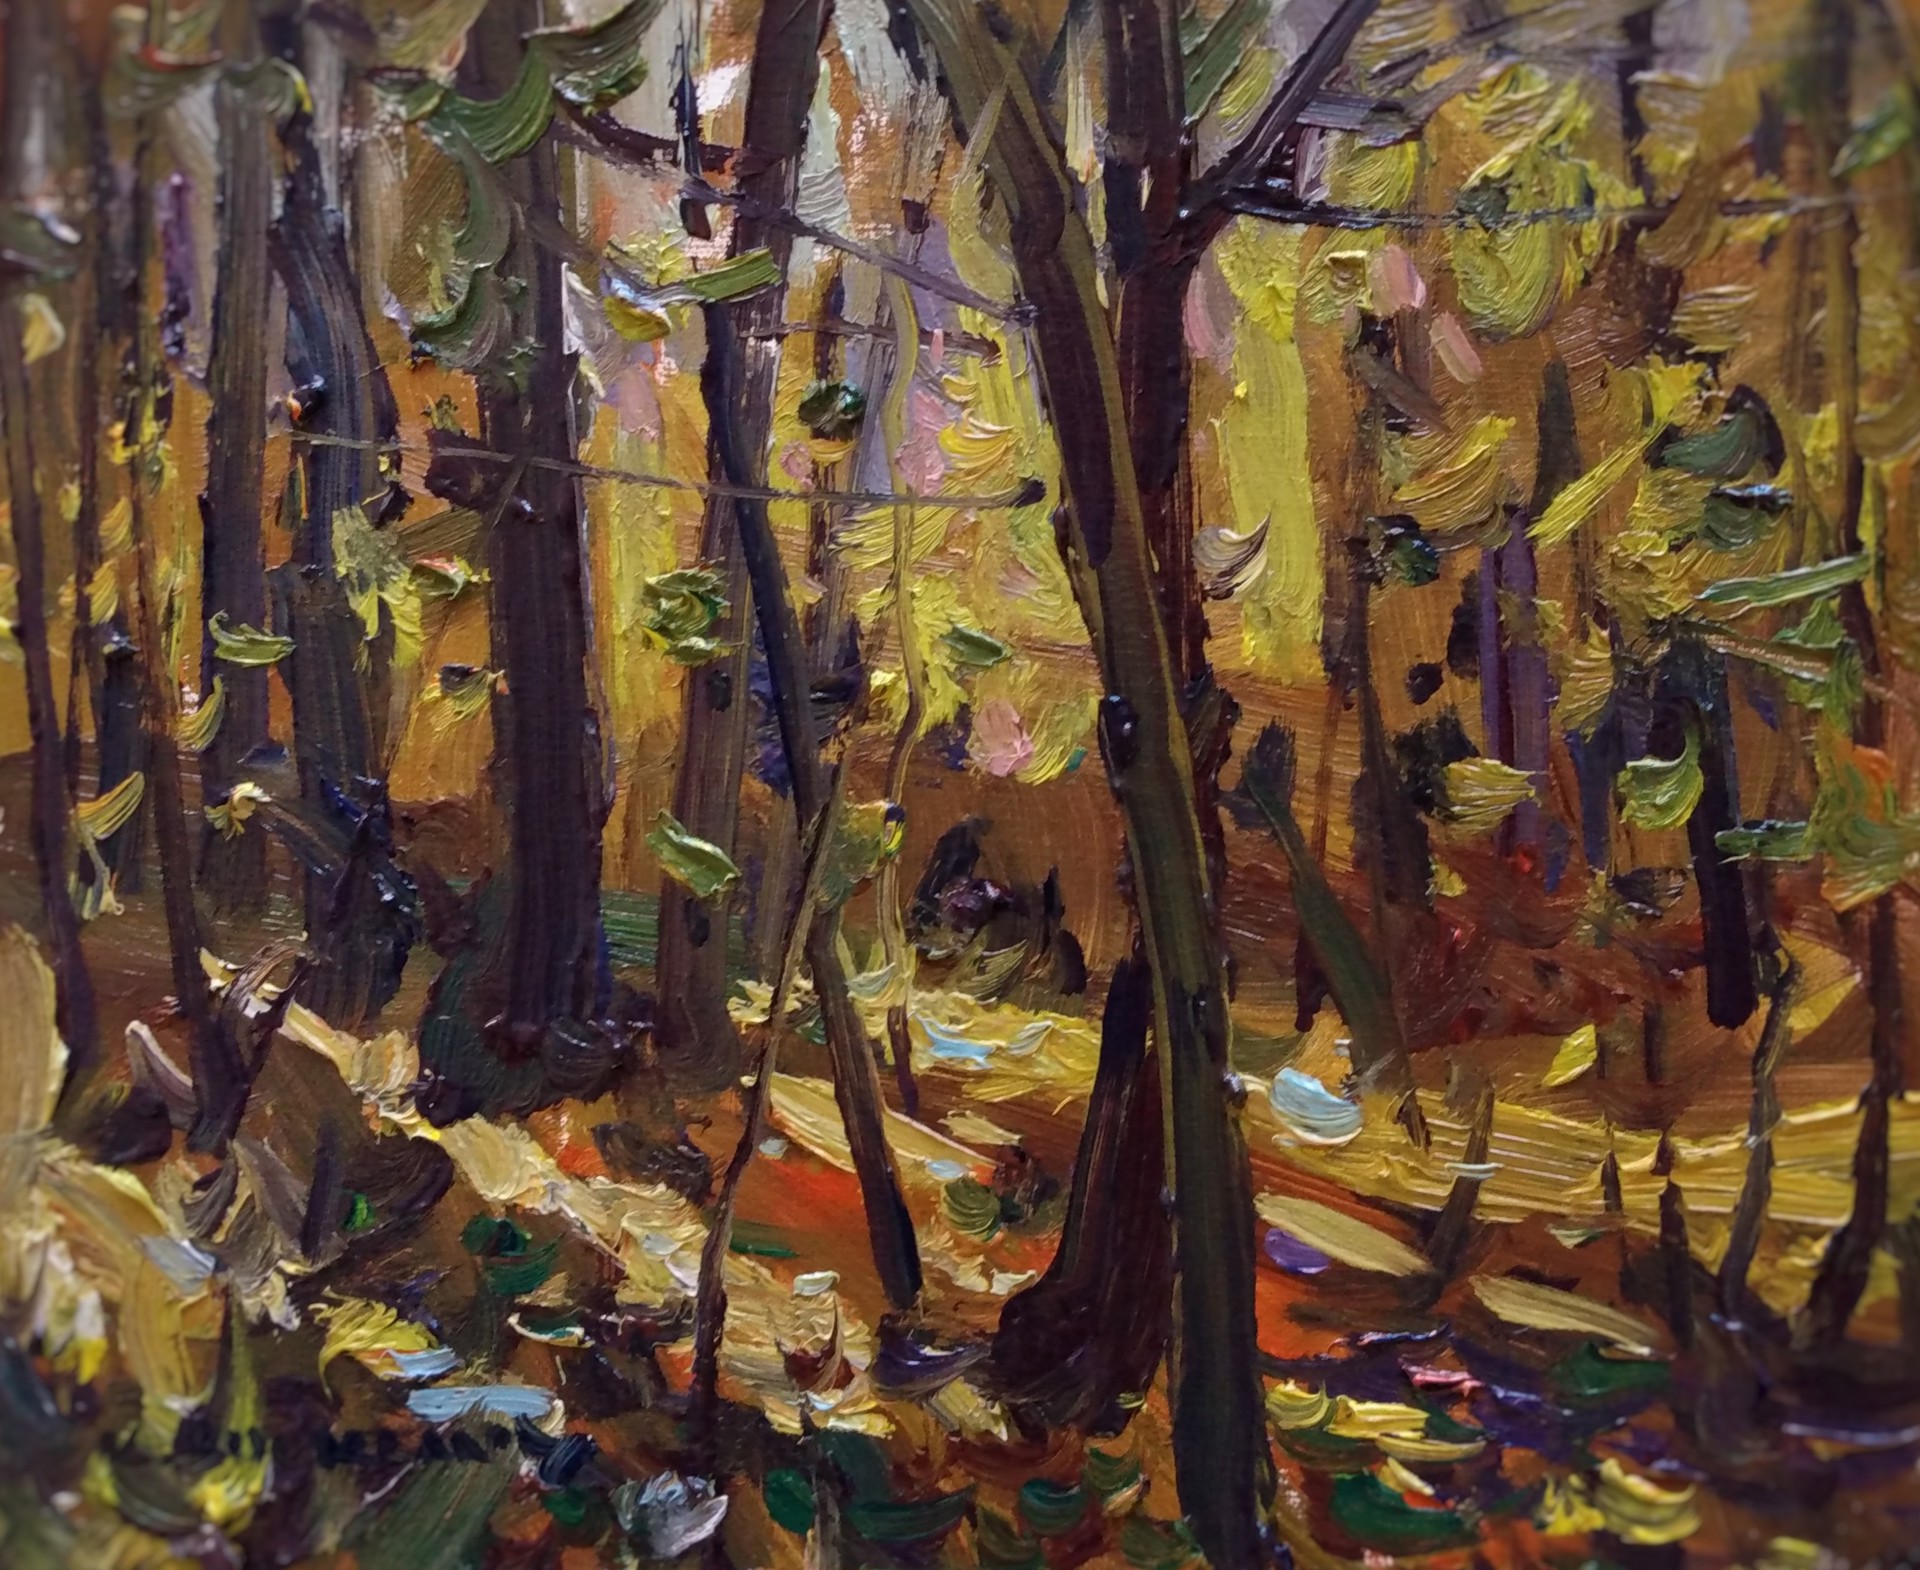 "Autumn Woods" original oil painting by Kyle Buckland